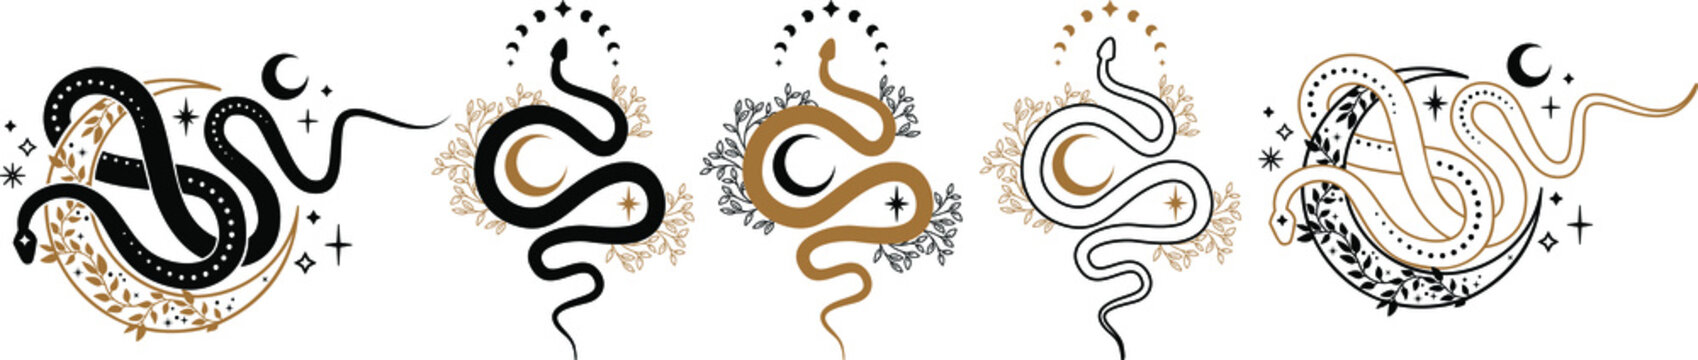 floral snake, magic celestial snake with crescent moon,star and moon phases. Mystical witchy symbol. Cosmic serpent and celestial bodies. Boho style print logo tattoo designs